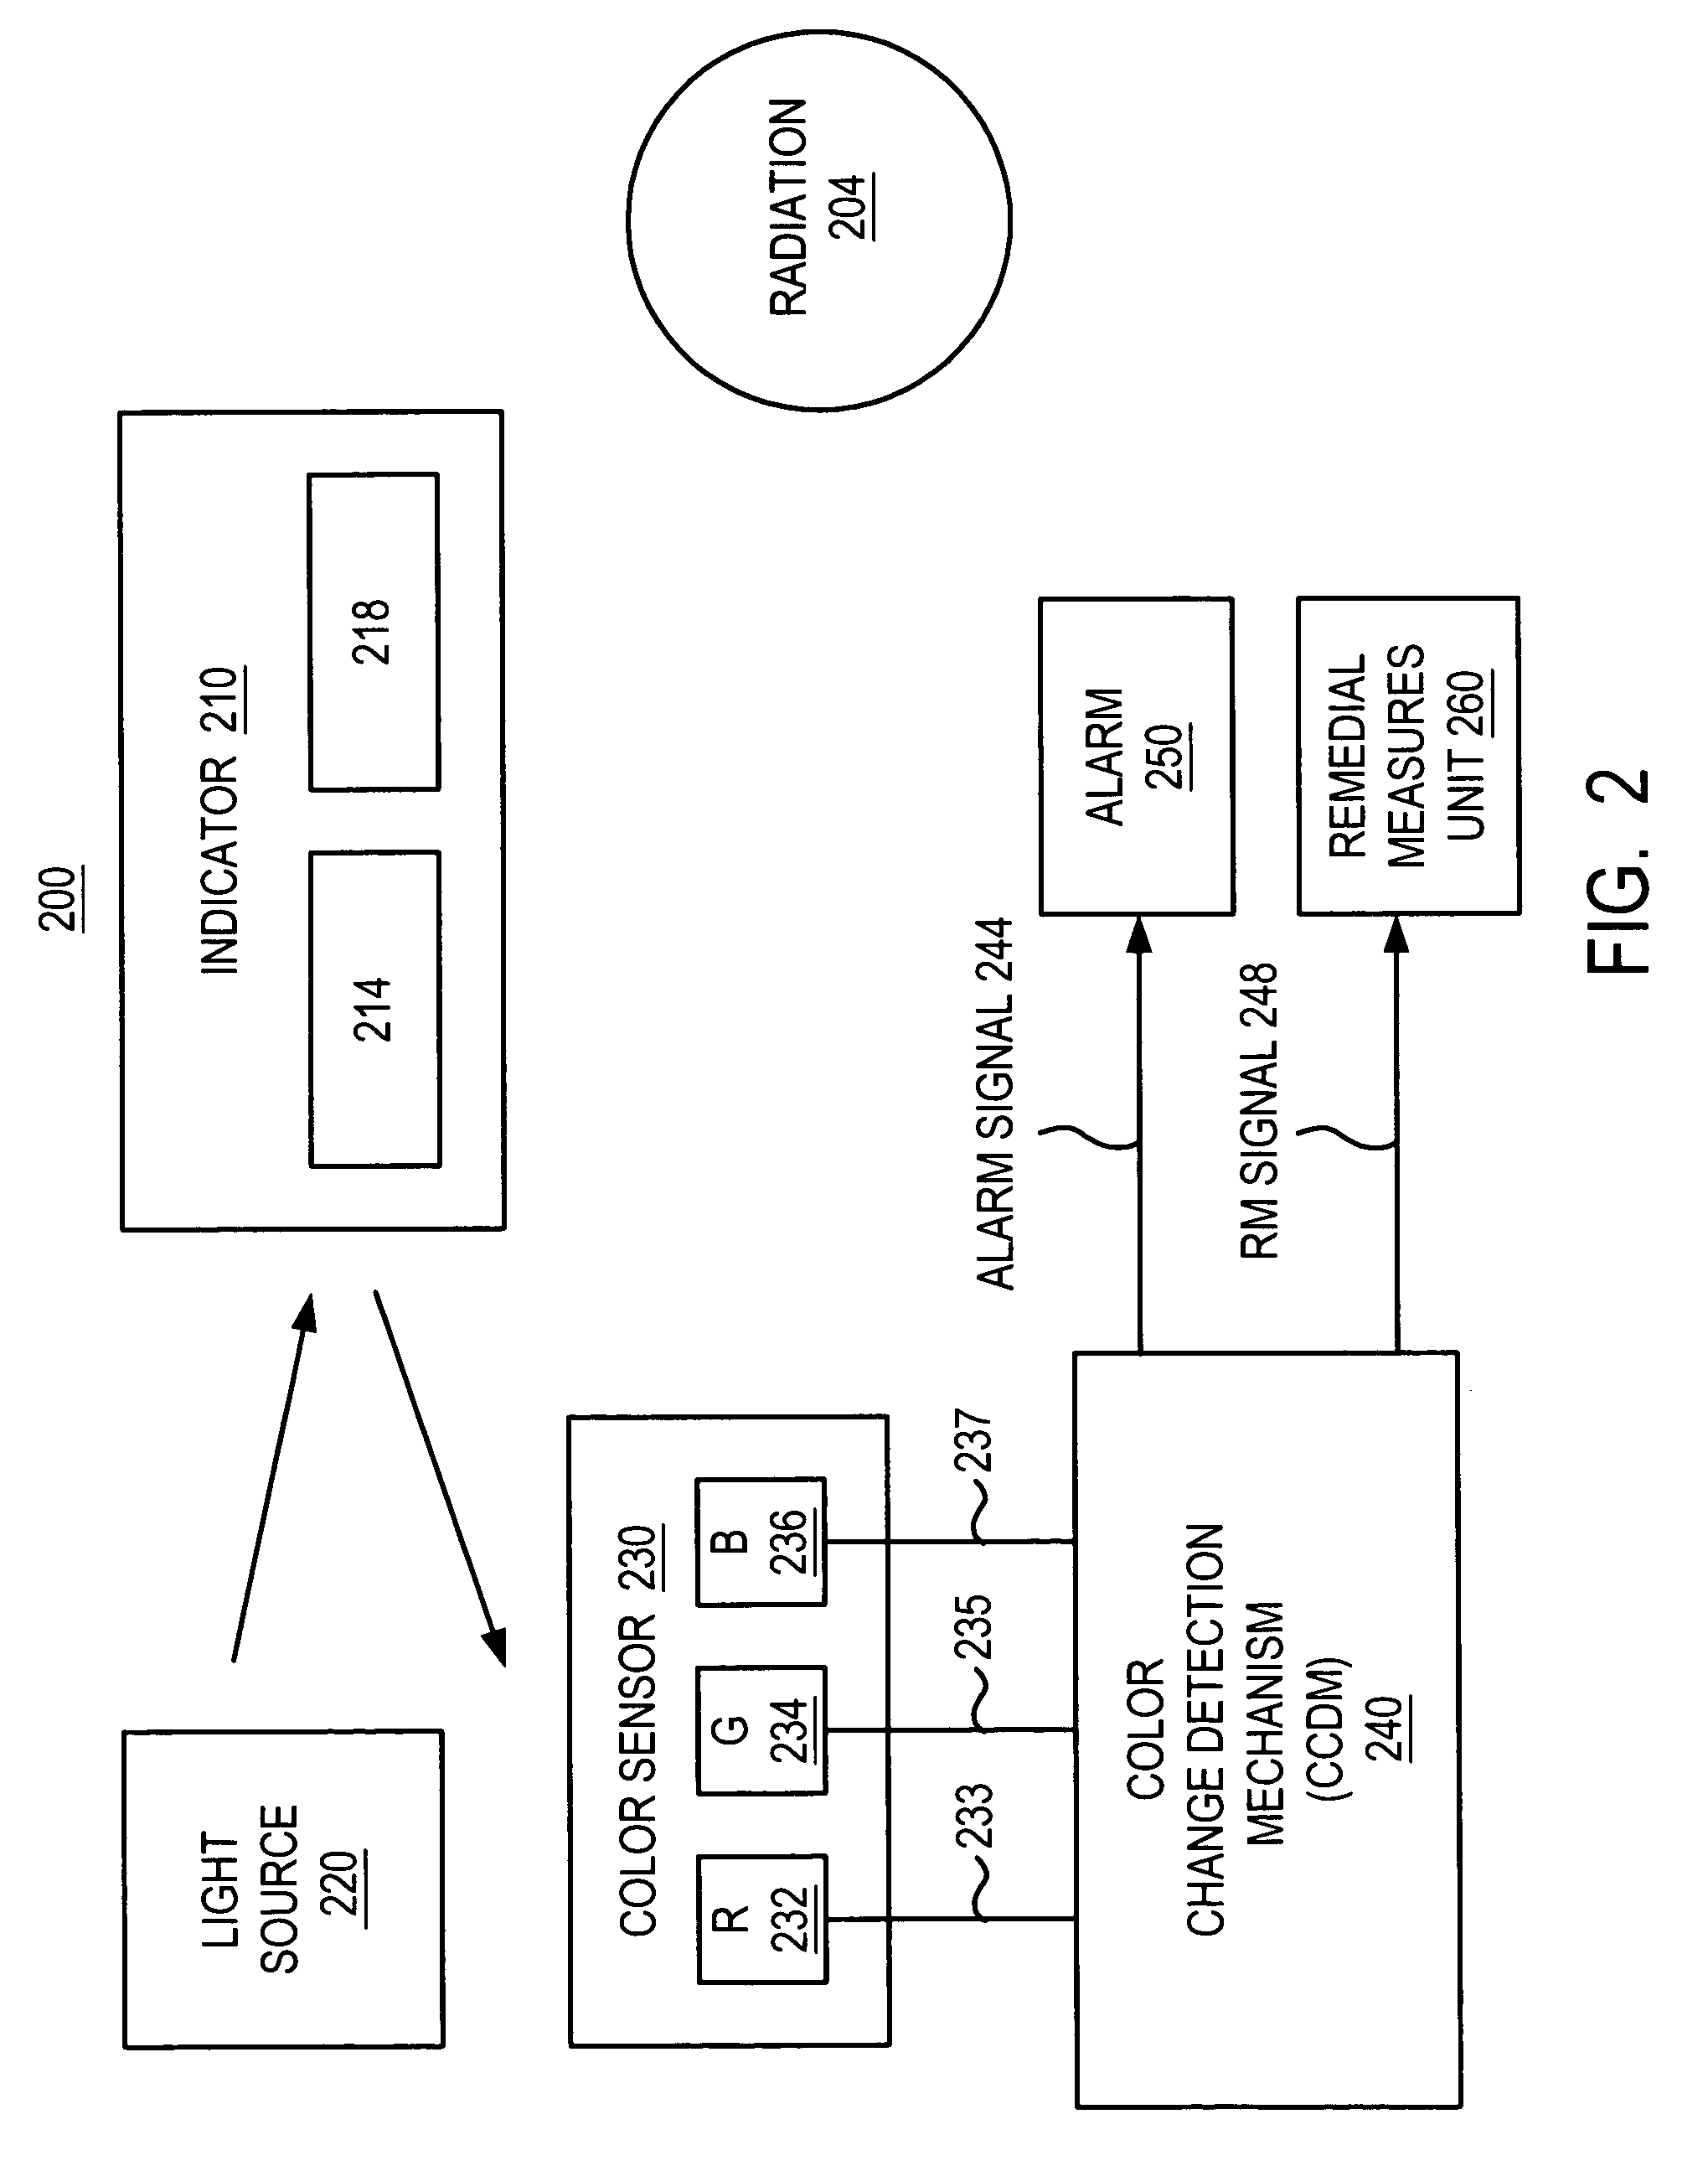 Method and apparatus for detecting gas/radiation that employs color change detection mechanism